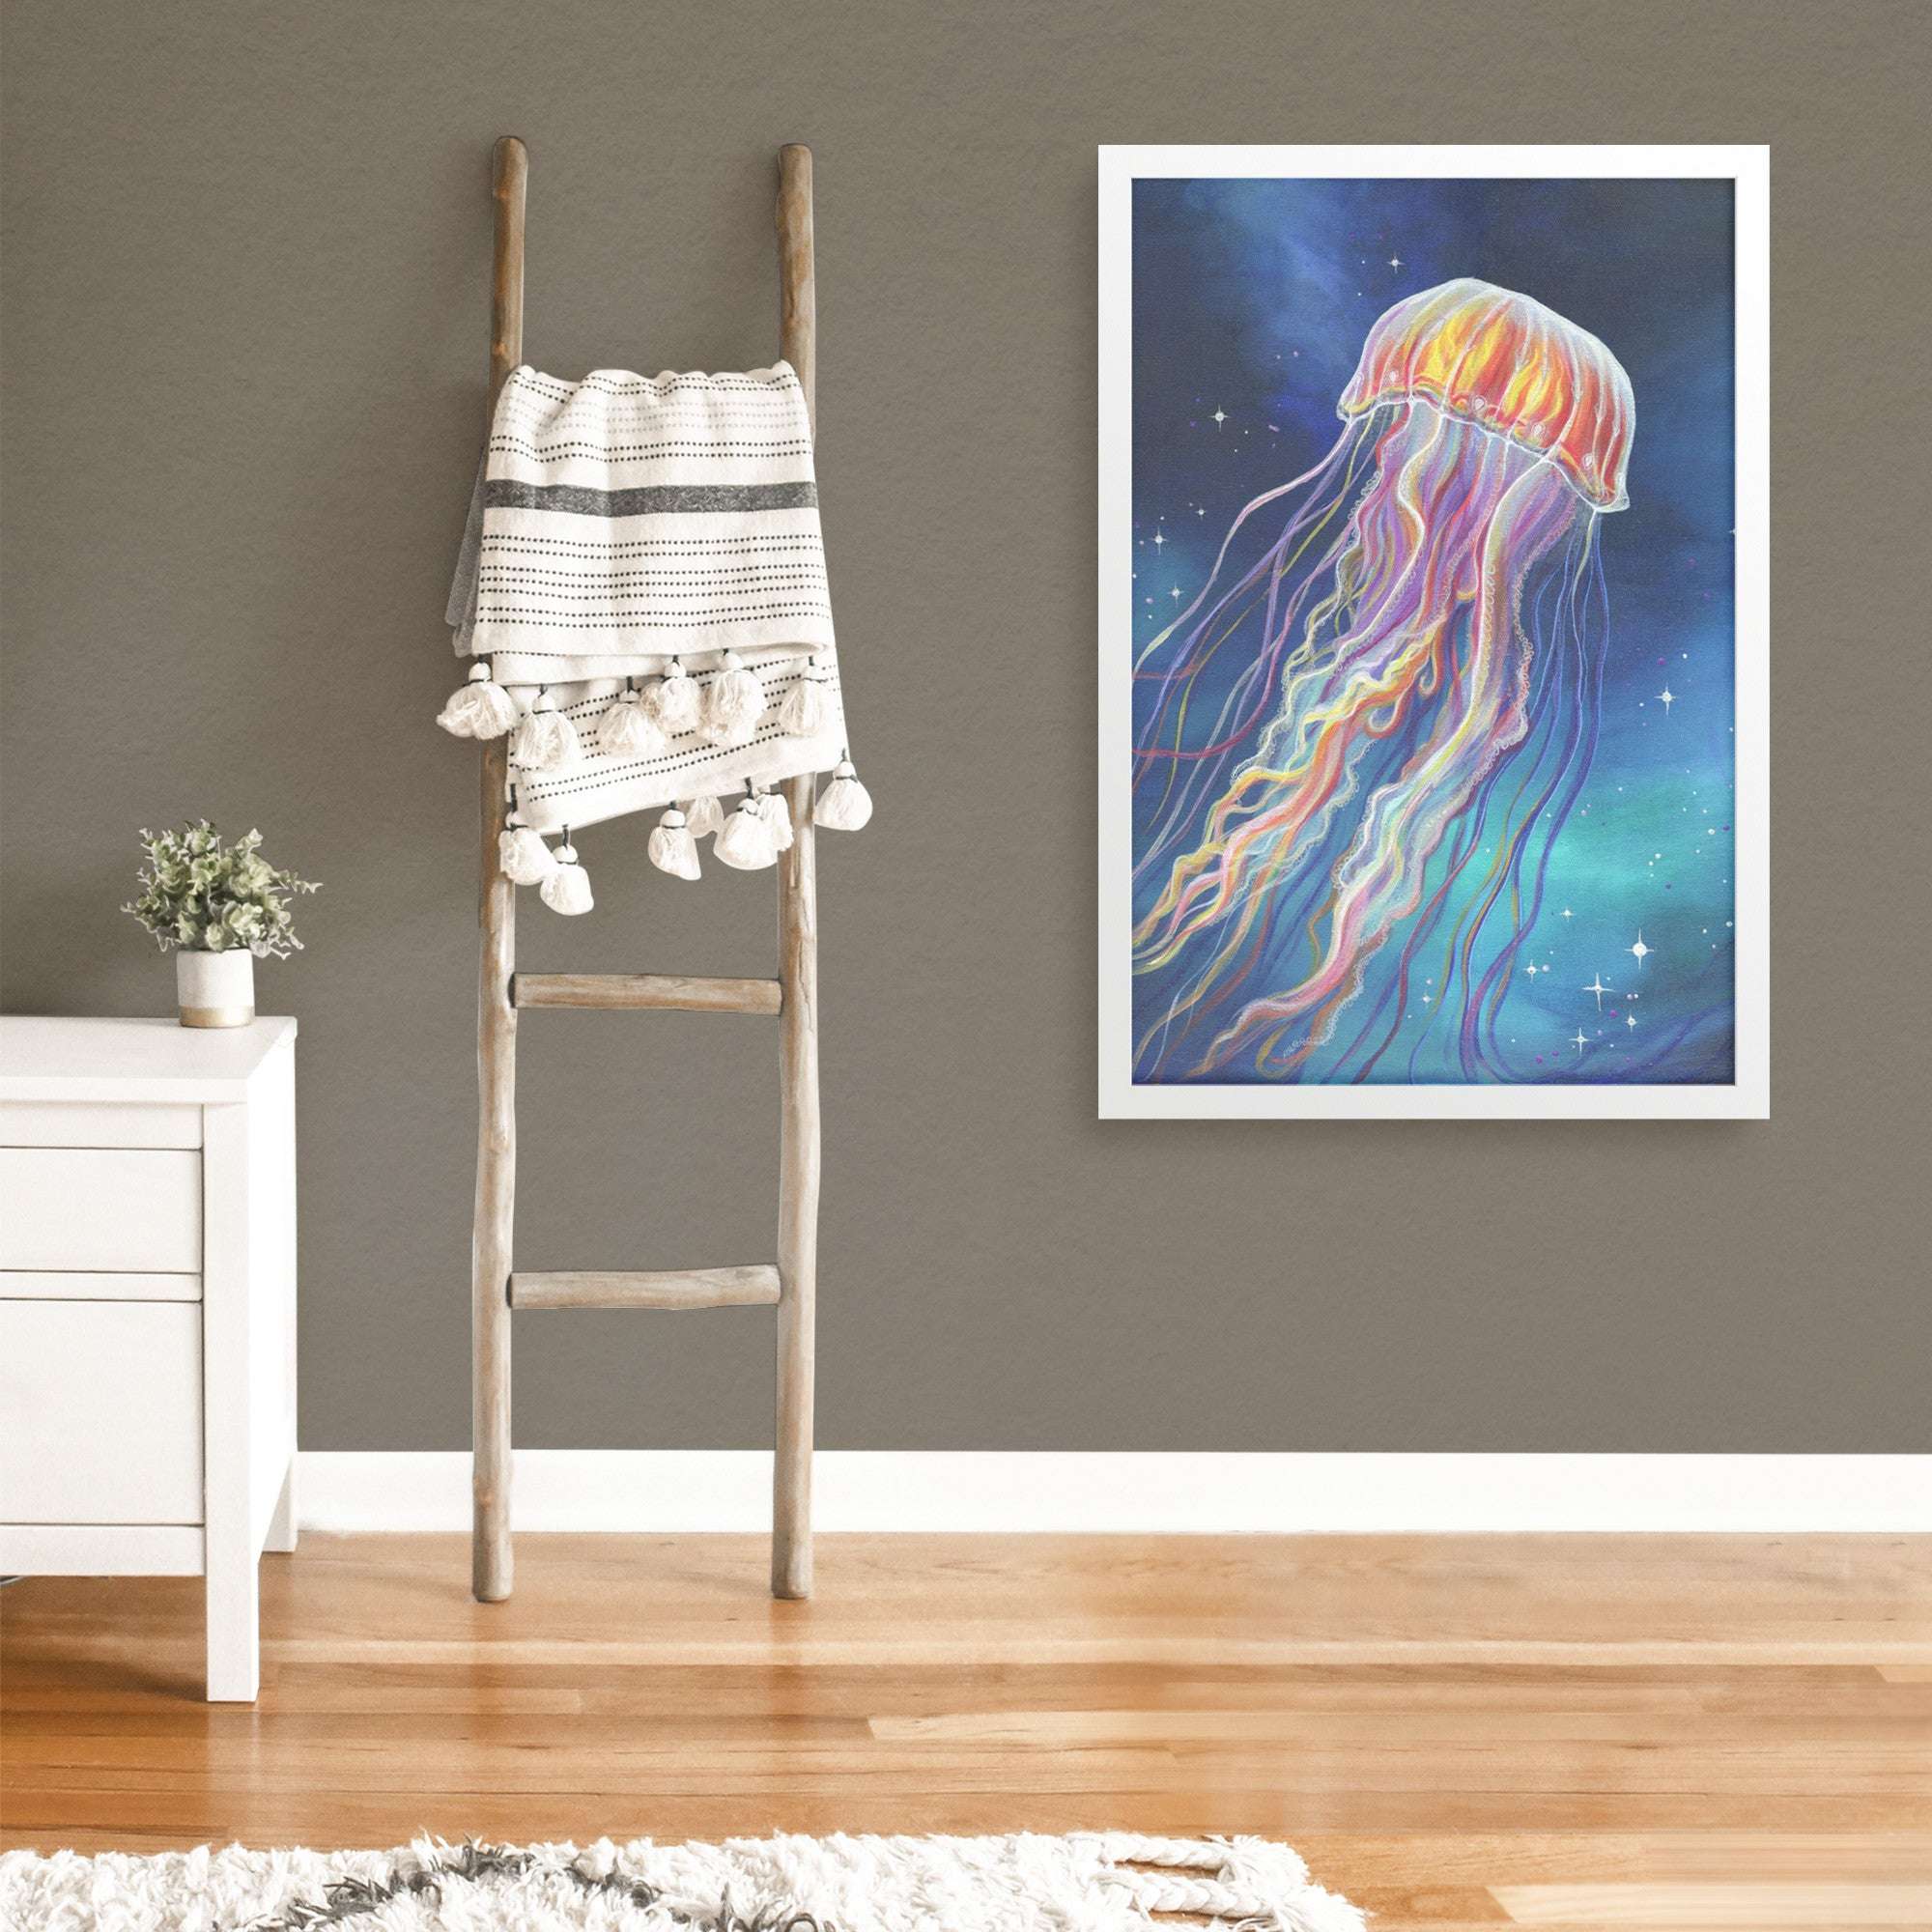 A large framed art print of a vibrant jellyfish on a grey wall, with a rustic ladder and throw nearby.